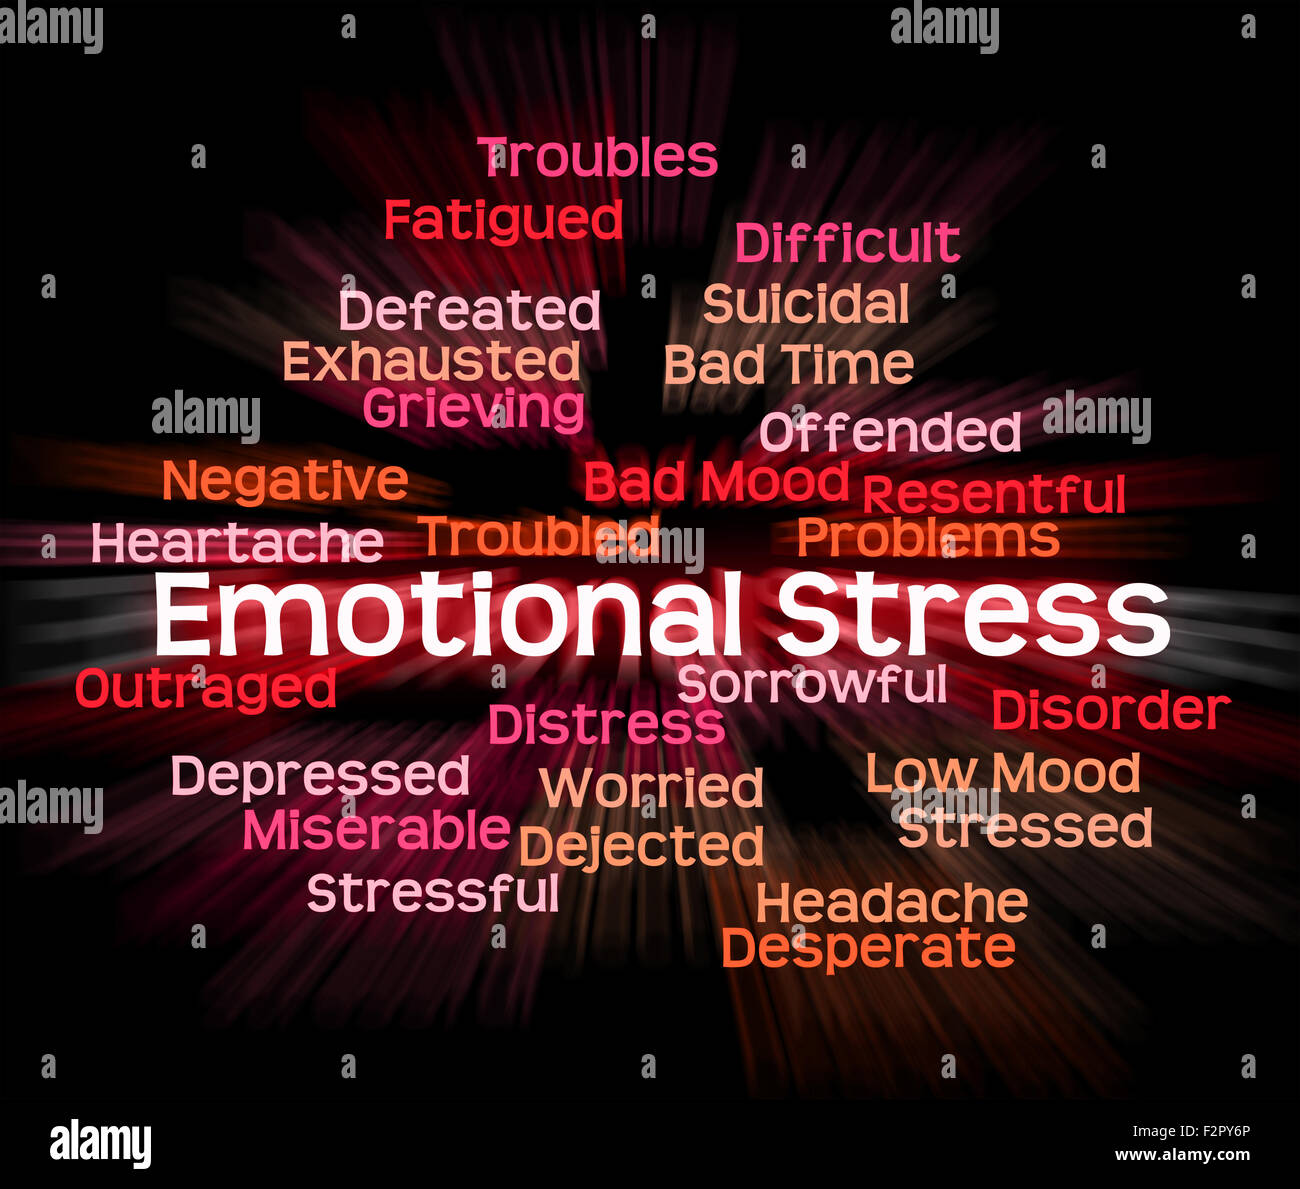 Emotional Stress Meaning Heart Rending And Wordcloud Stock Photo